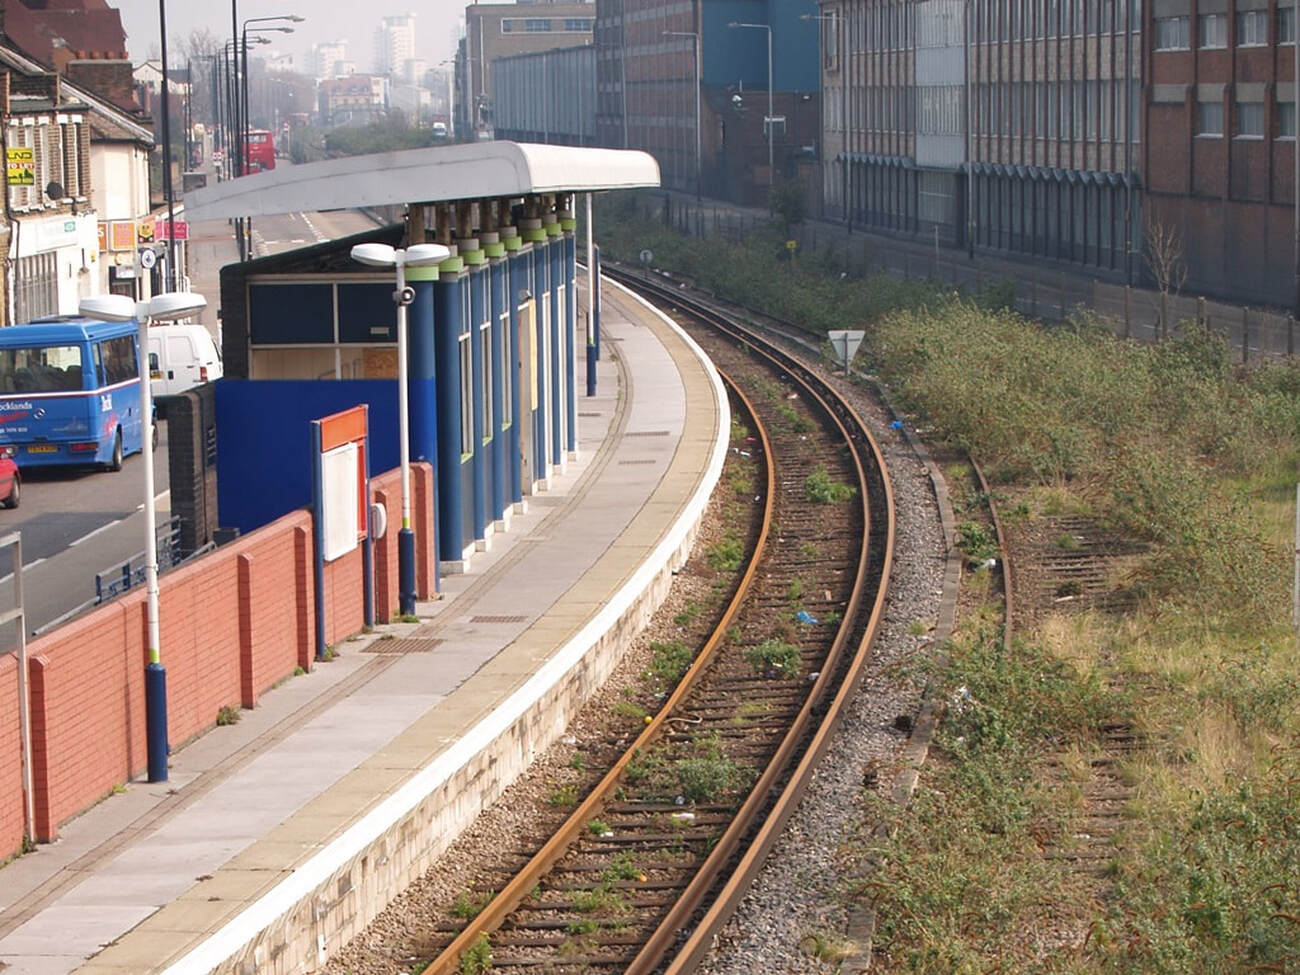 Silvertown Station building and platforms shortly after closure 